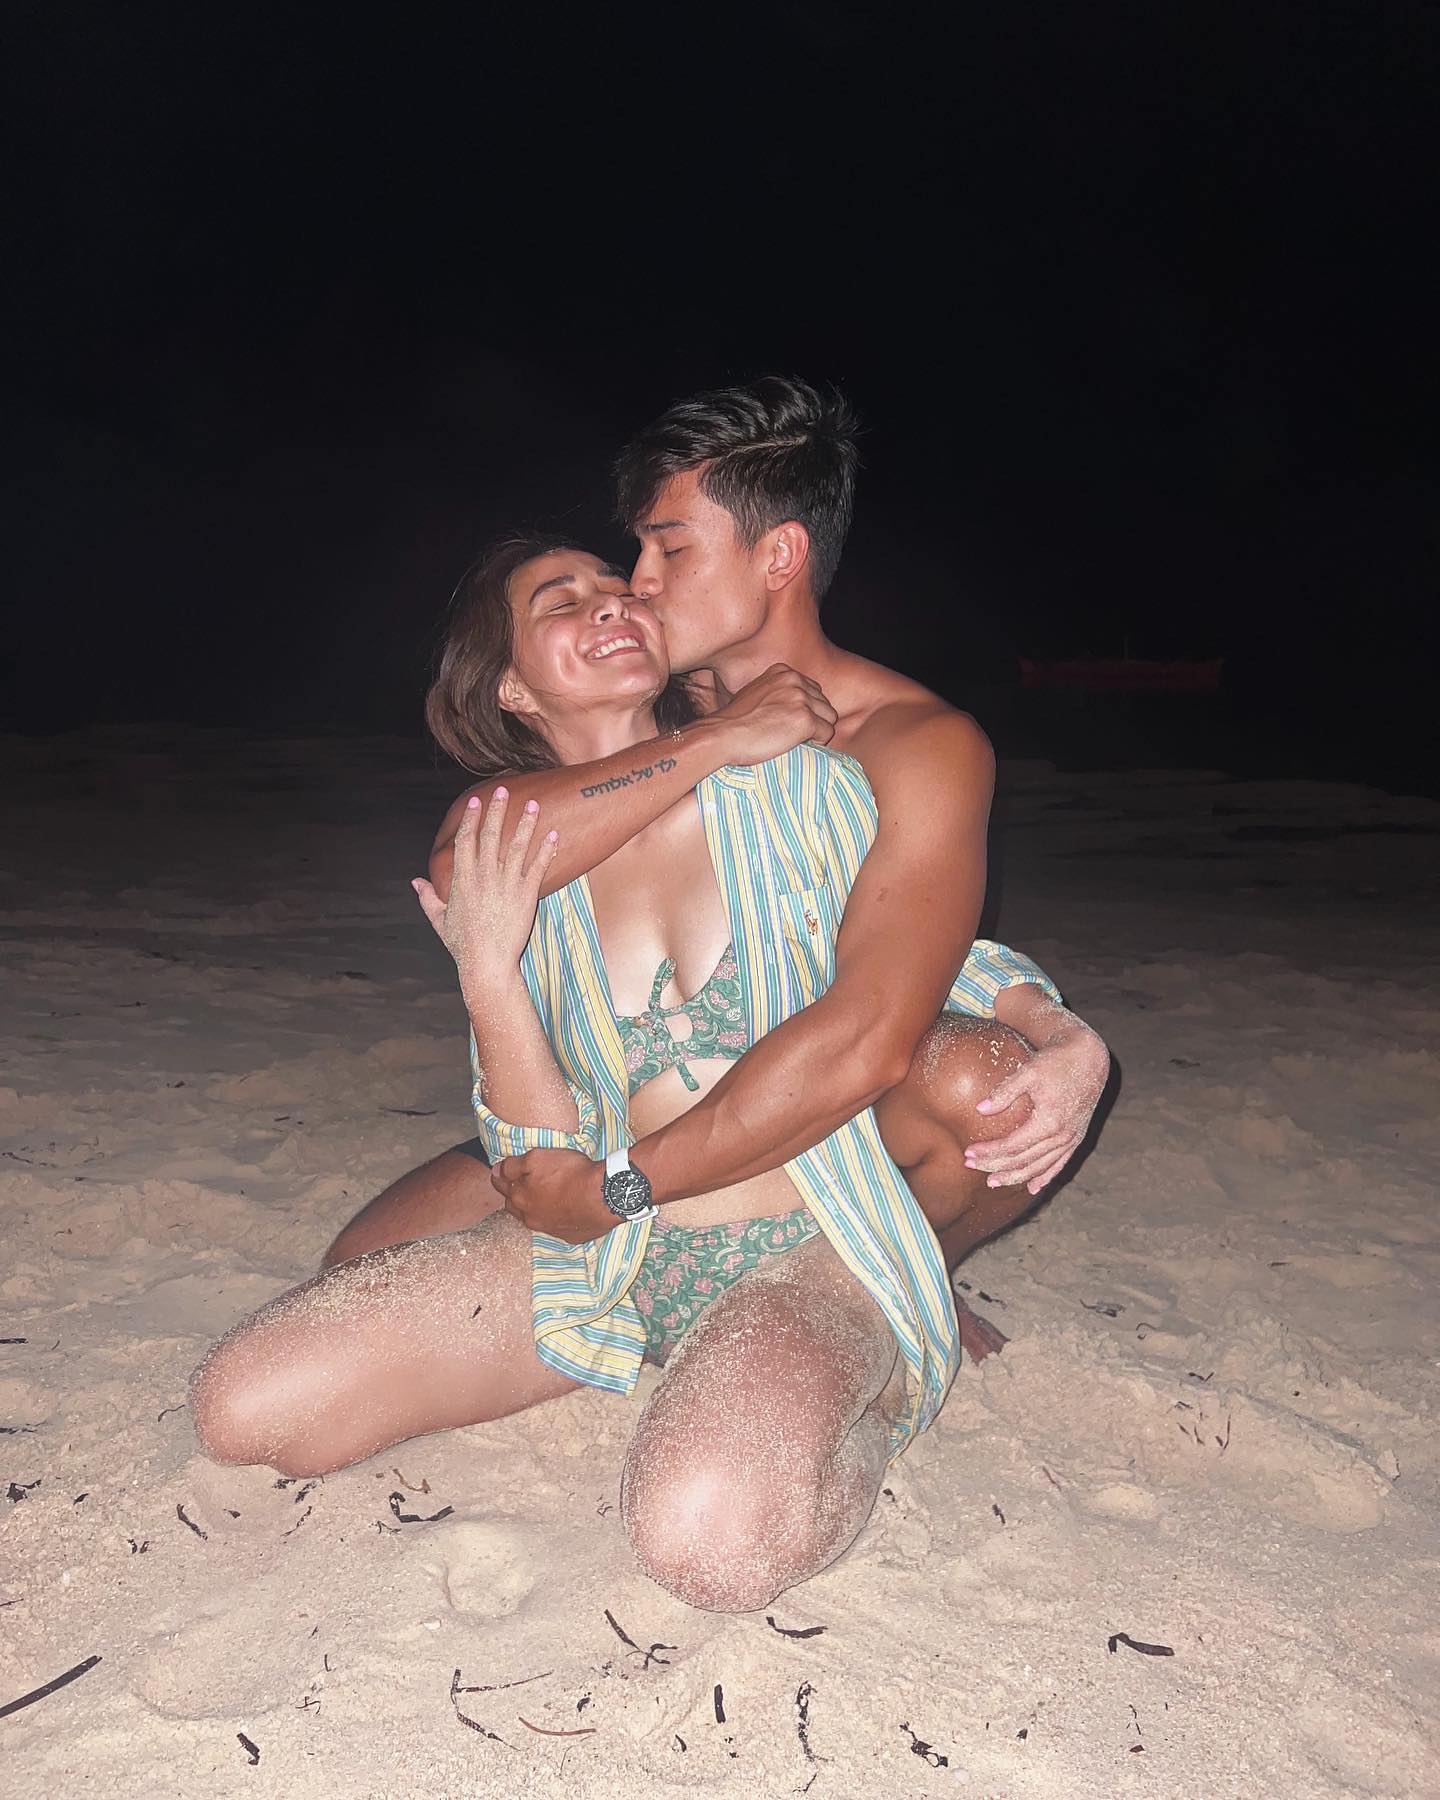 Marco Gumabao goes public with relationship with Cristine Reyes